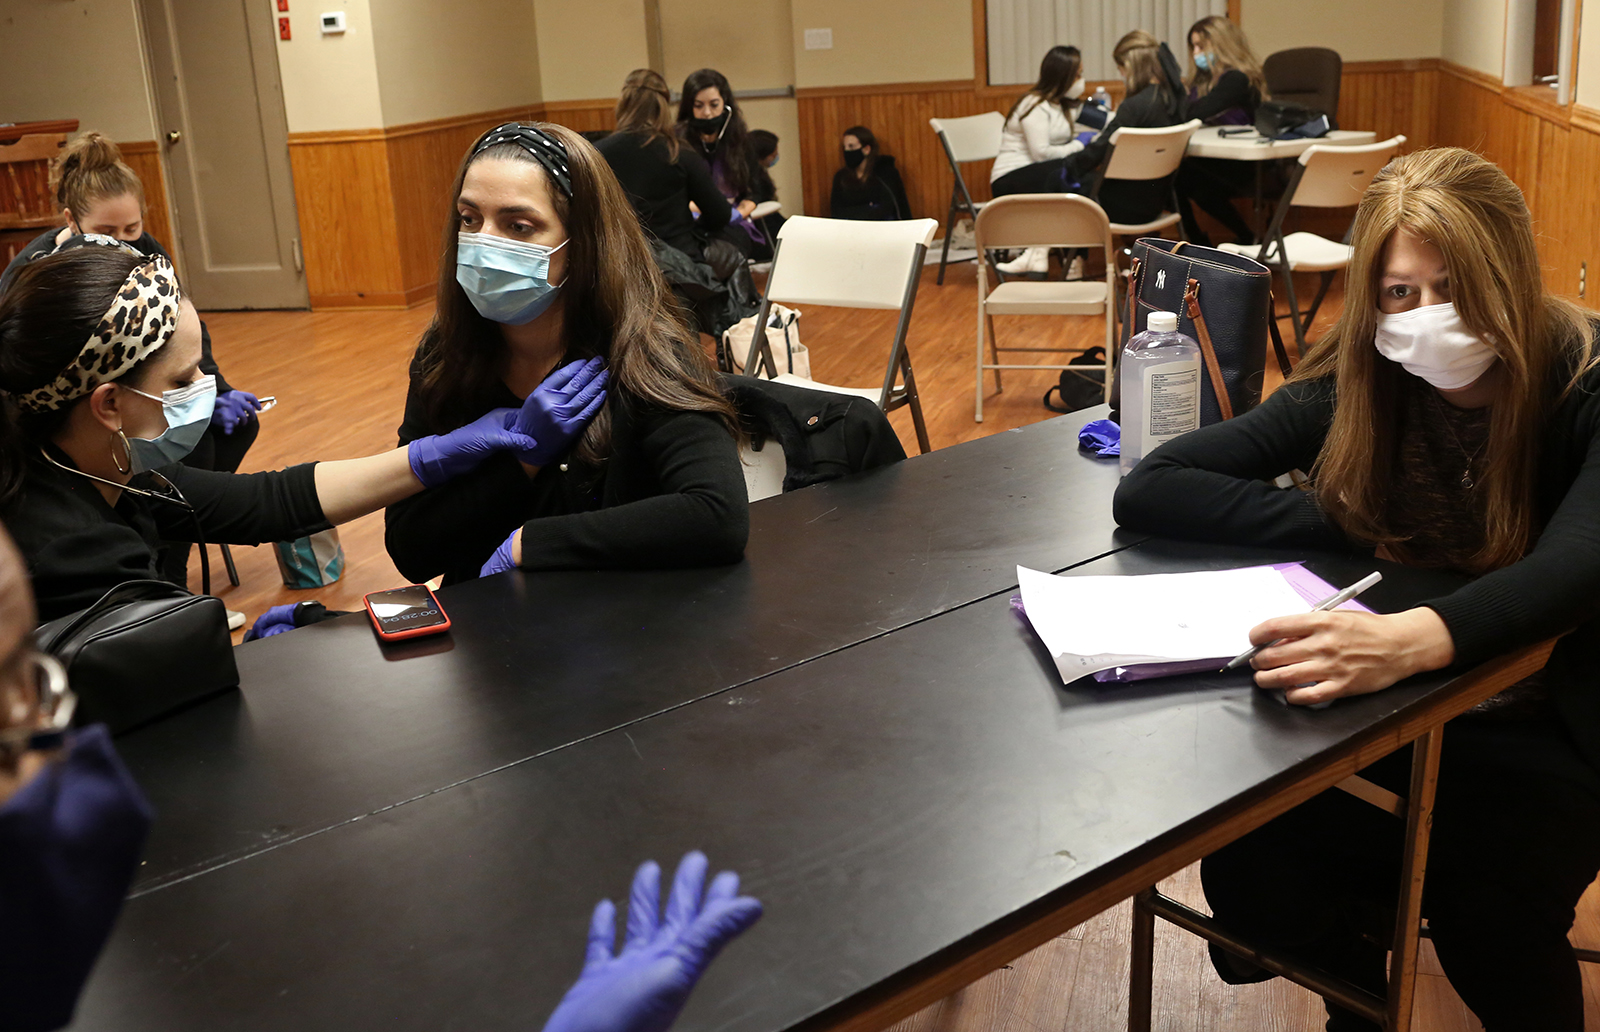 (L-R) EMT instructor Nisha Lewis, and EMT trainees Baila Eisenberger, 37, (also a hair stylist,) Leah Goldberger, 26, (also a pharmacy student,) and Elizabeth Freud, 26, (also a teacher,) take part in an EMT skills training in New York on November 05, 2020. (Photo by: Yana Paskova for The New York Times/the National Geographic Society)